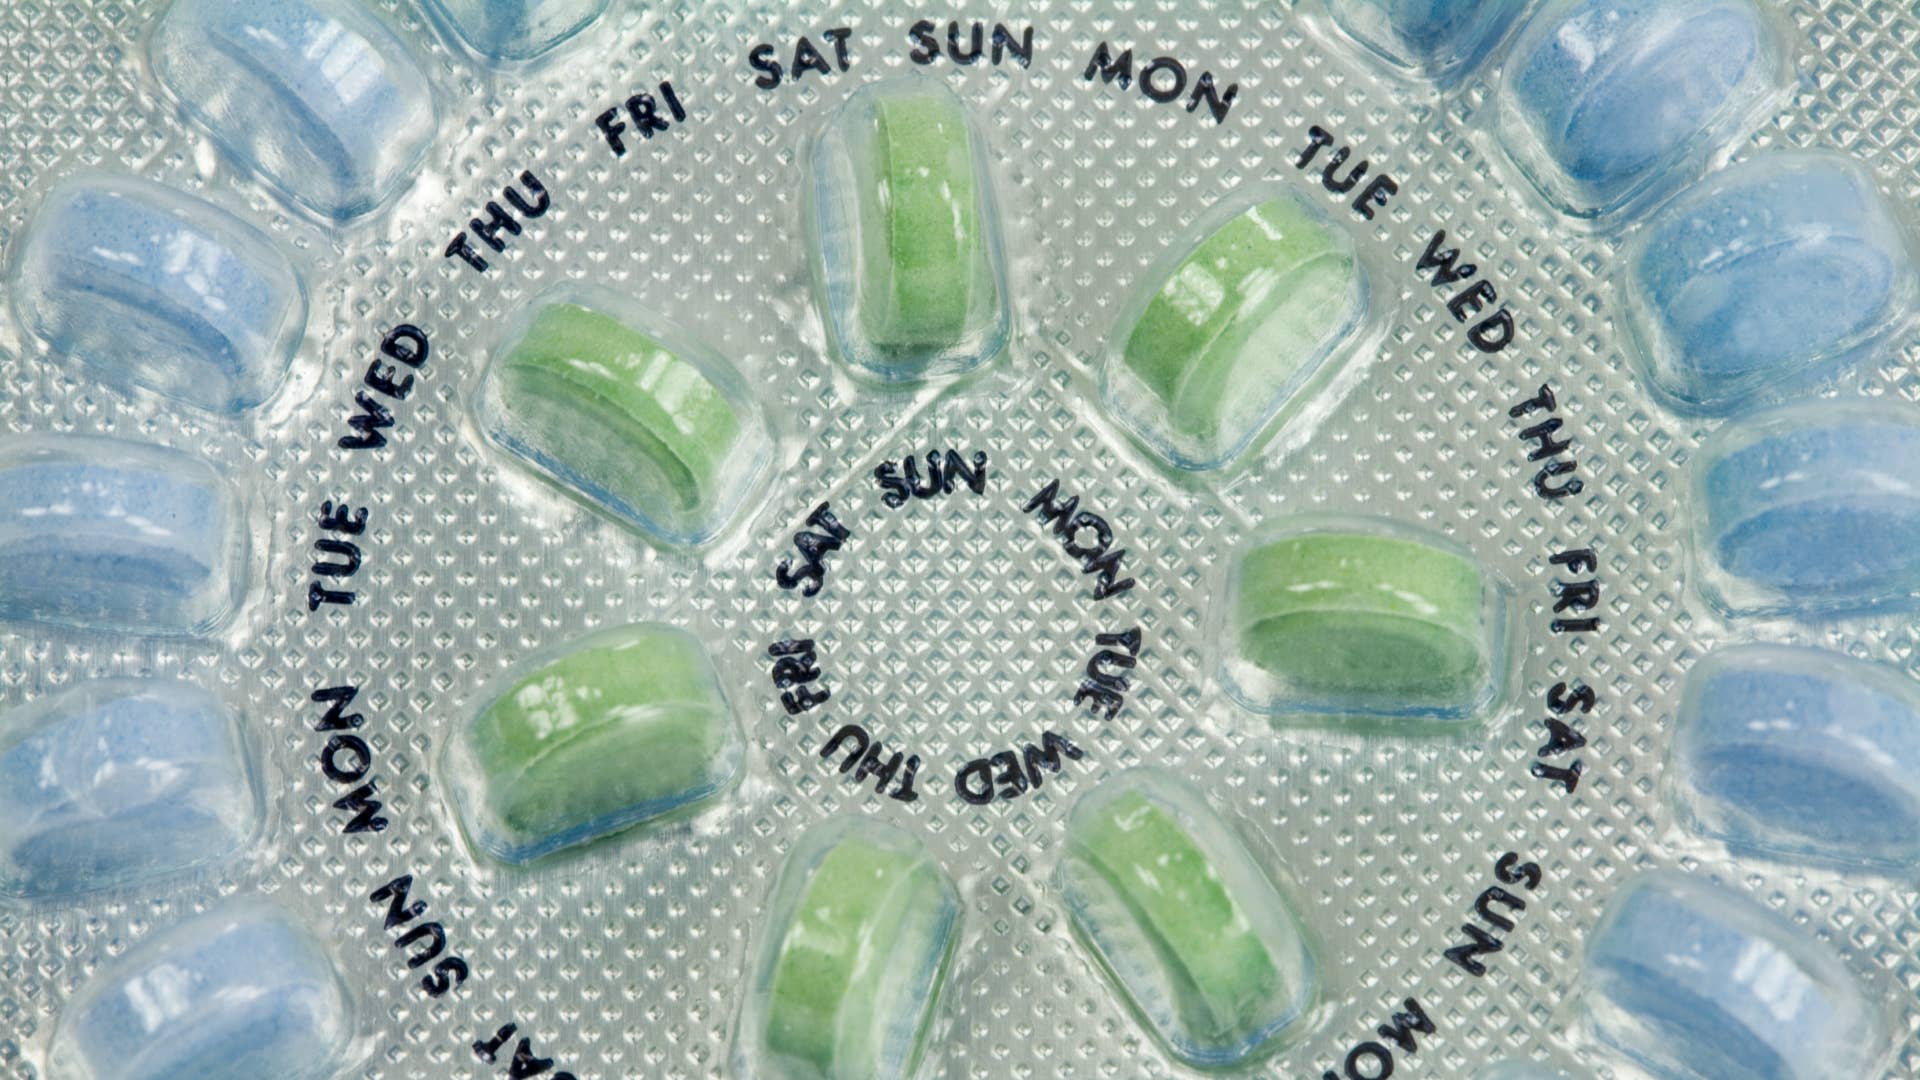 A package of birth control pills is pictured